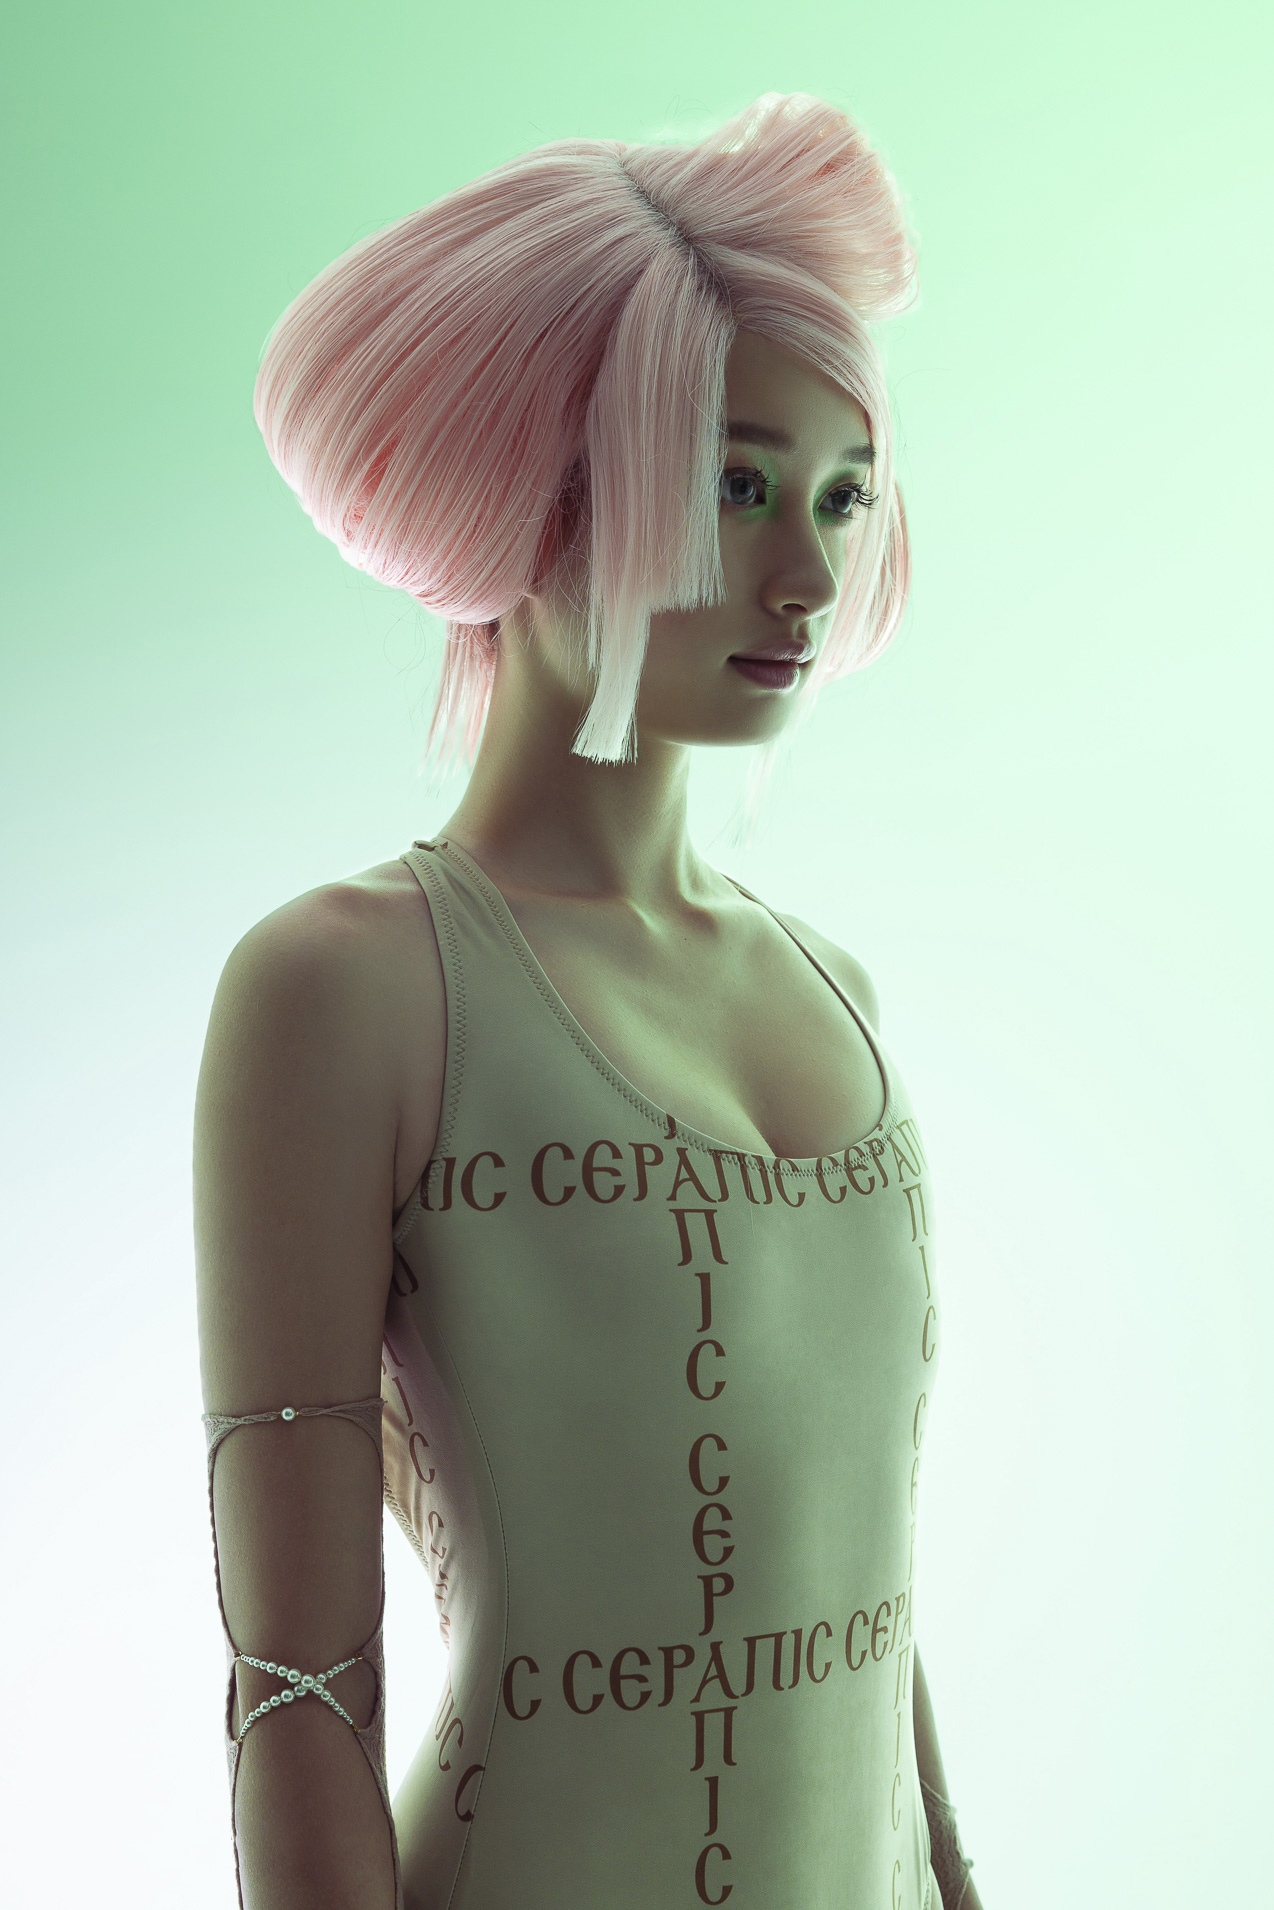 A woman standing with pink hair